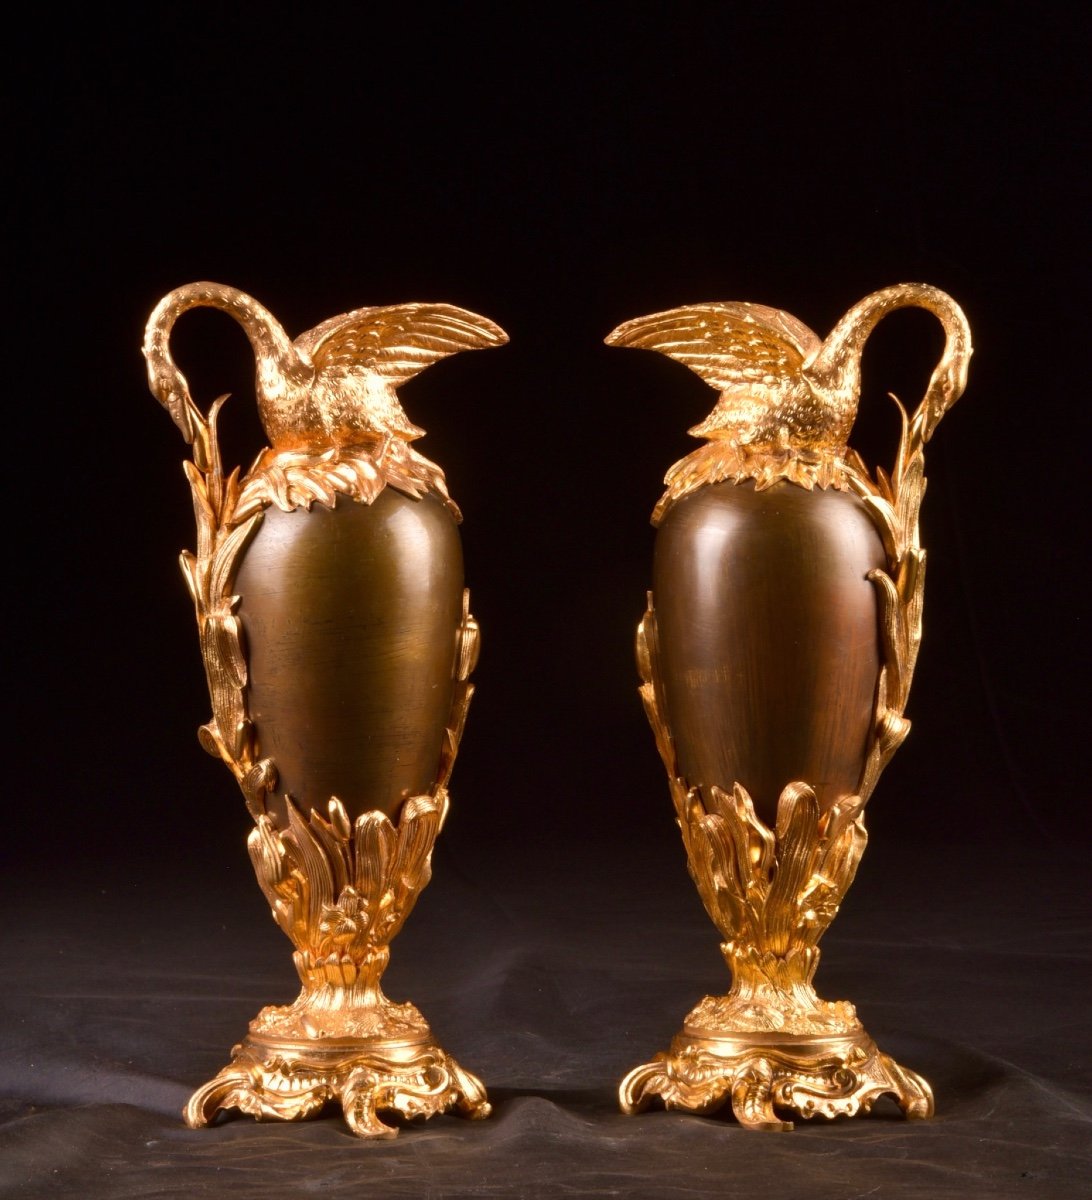 Pair Of Large Napoleon III Vases From The 19th Century, France -photo-7